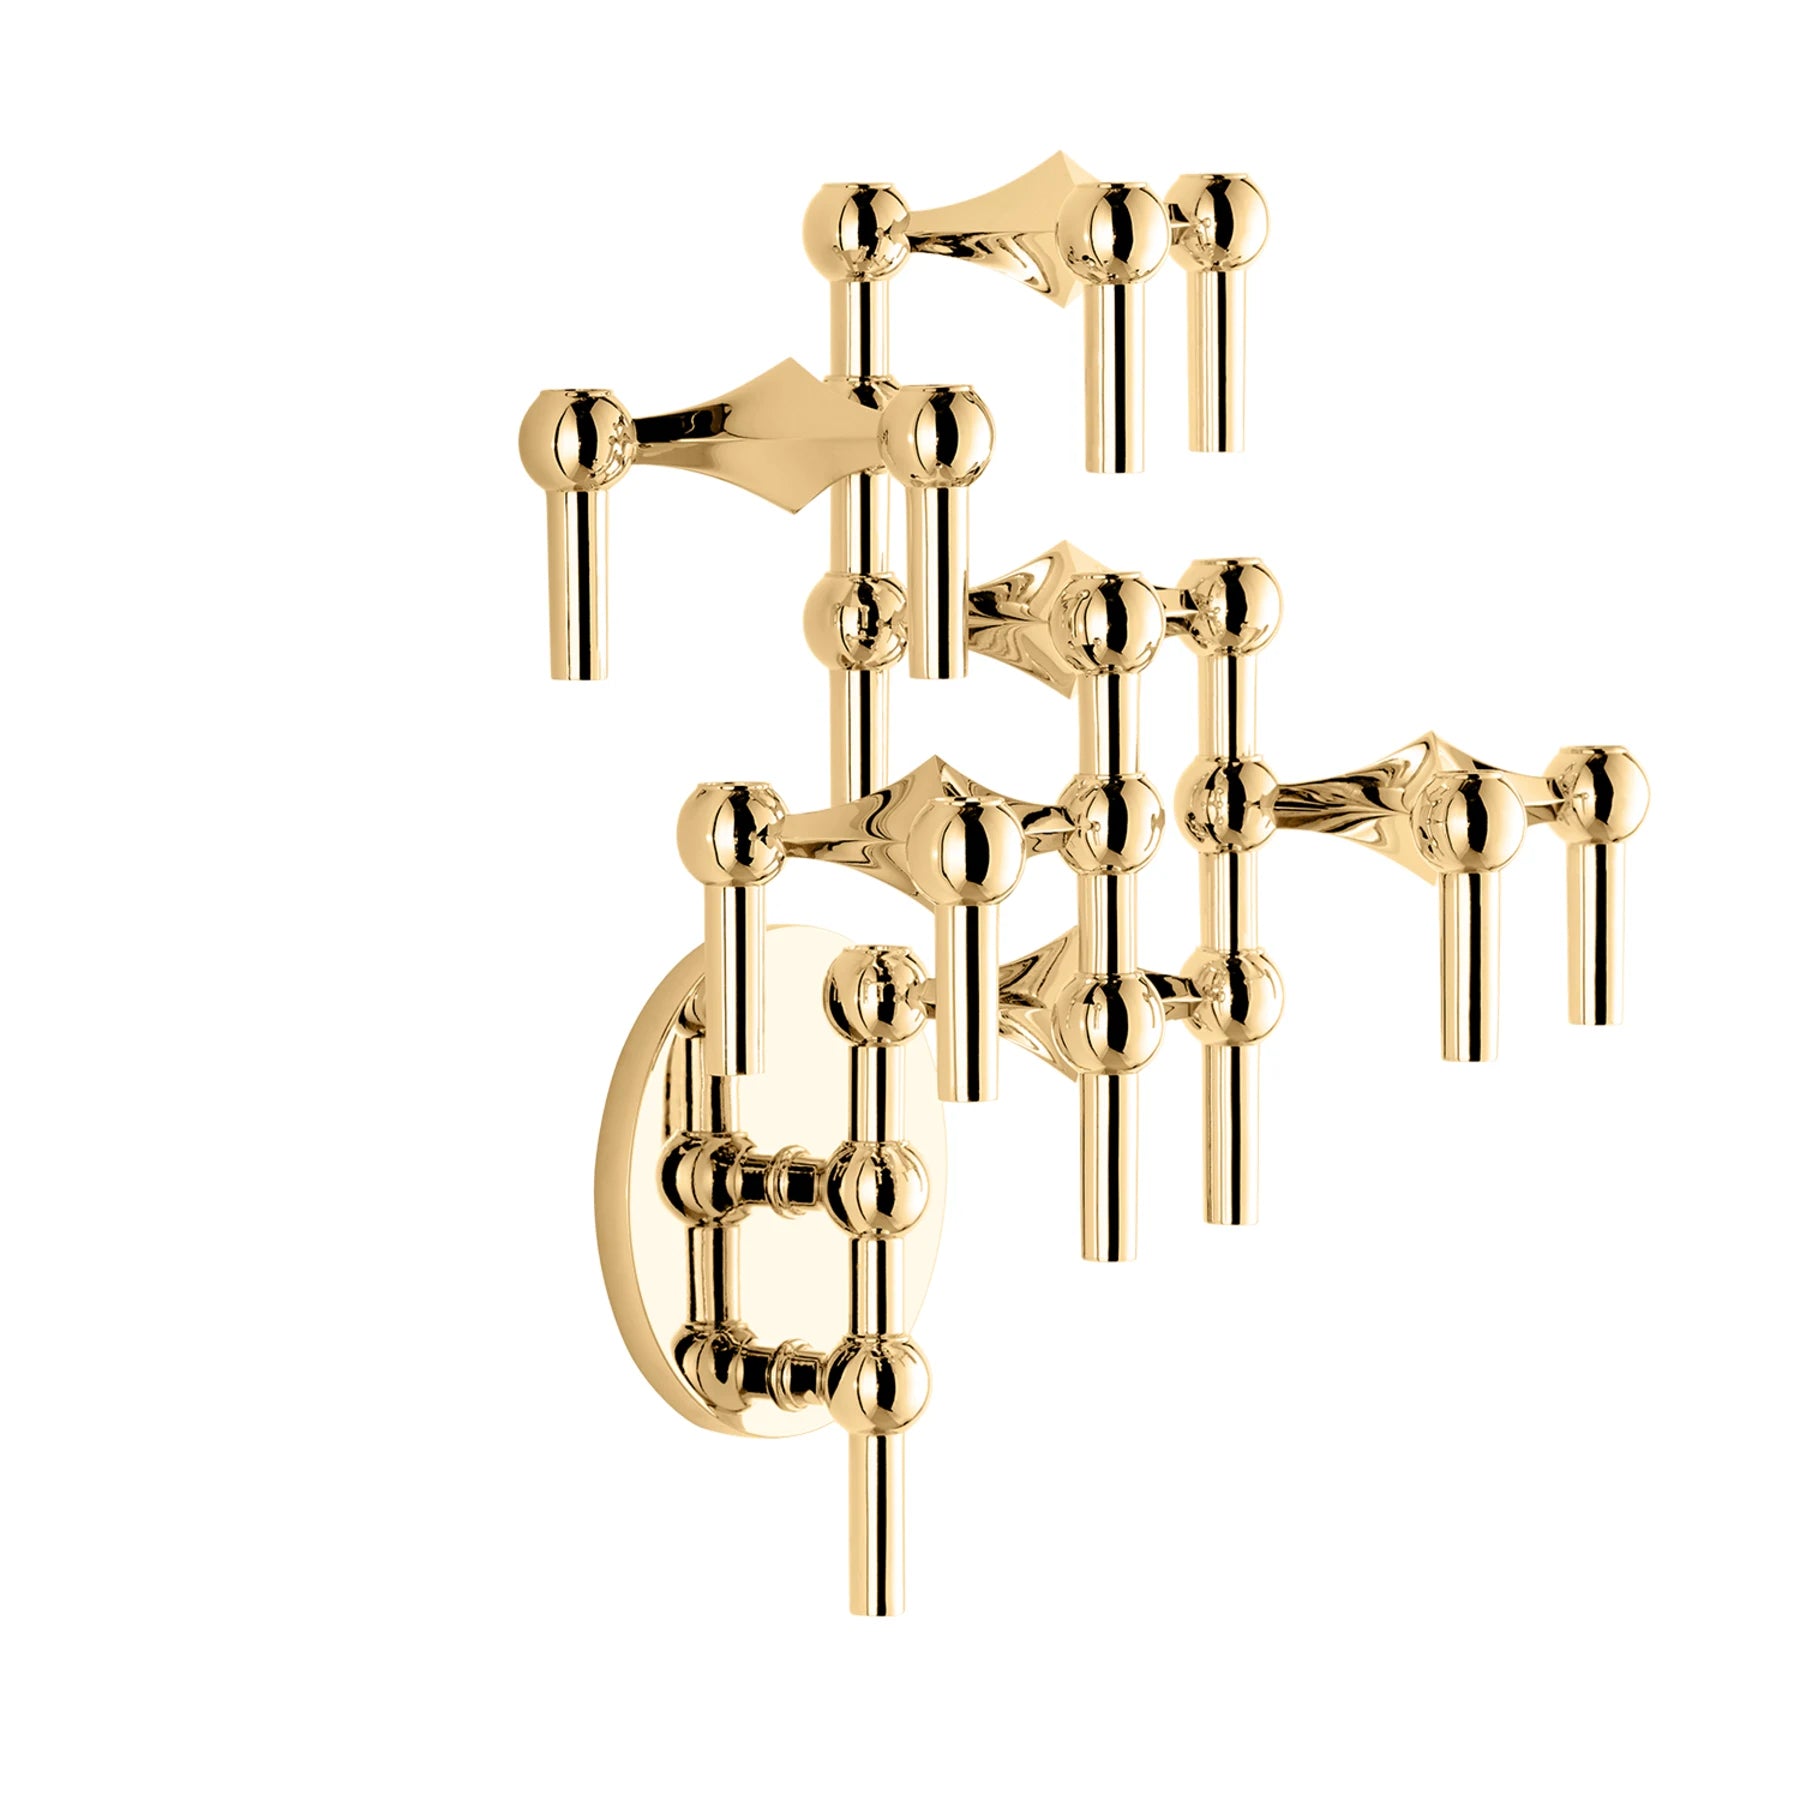 STOFF Nagel Wall Hanger, Solid Brass